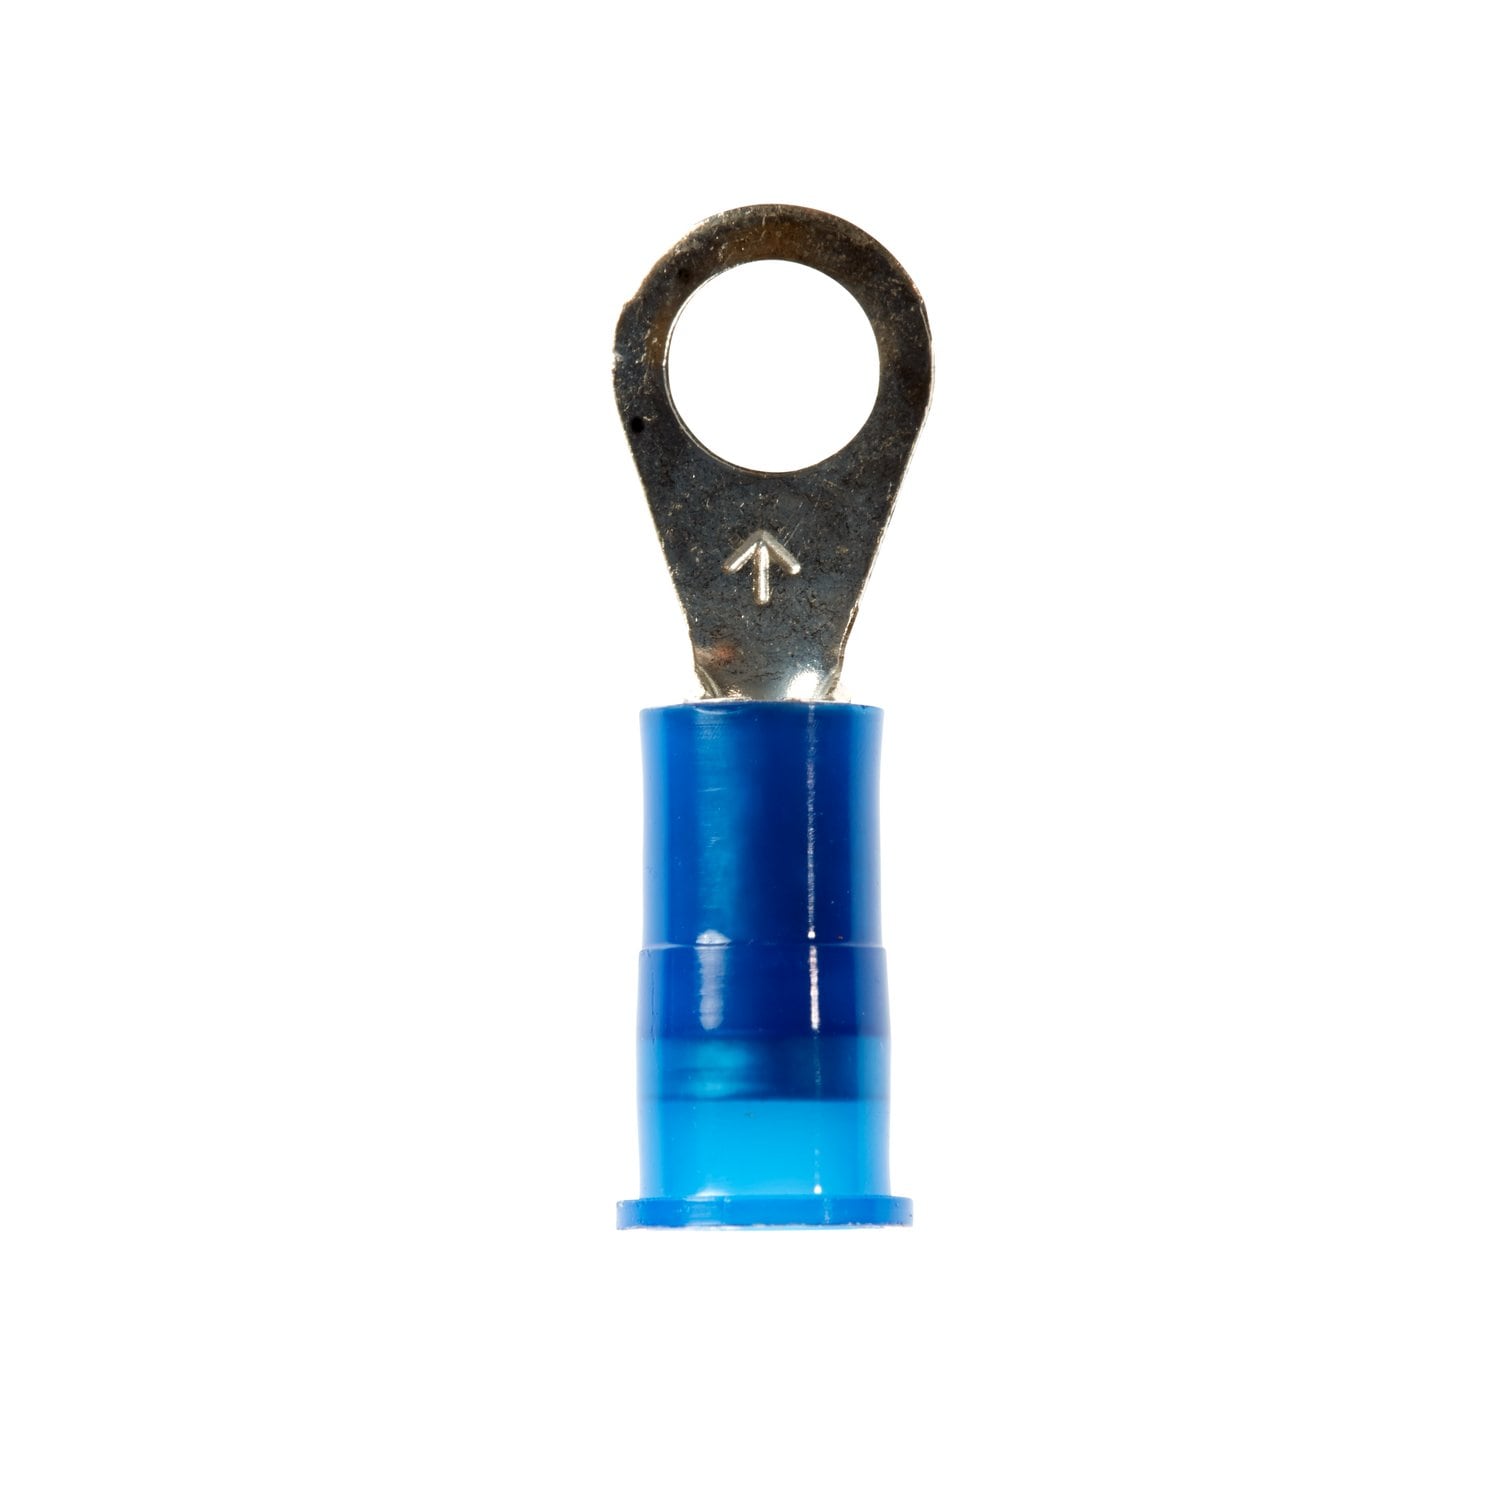 7100164004 - 3M Scotchlok Ring Tongue, Nylon Insulated w/Insulation Grip
MNG14-10R/LK, Stud Size 10, 1000/Case